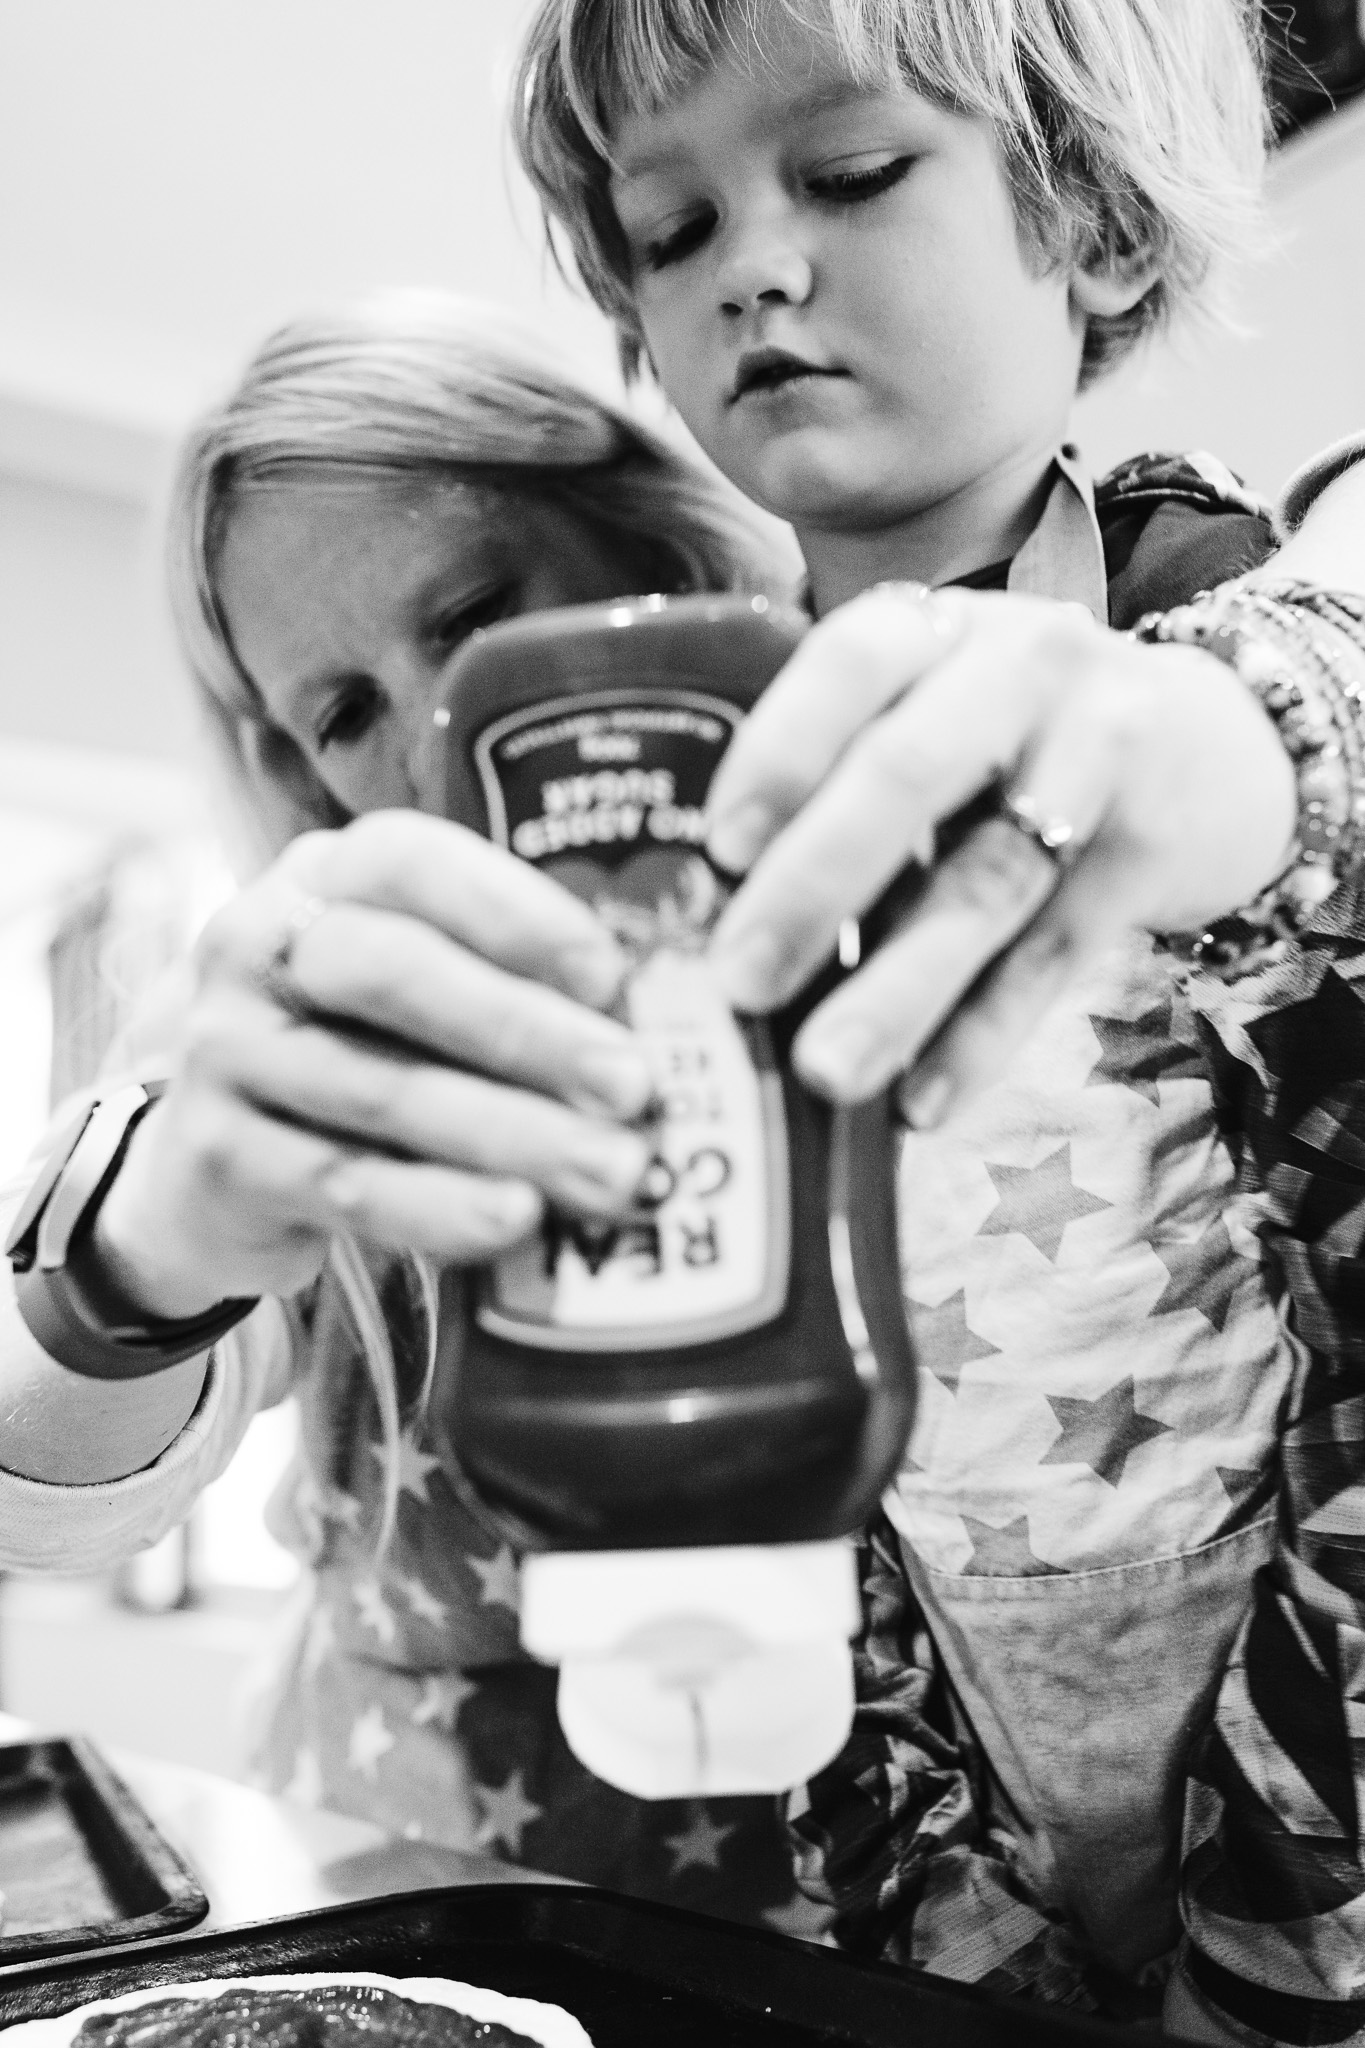 Mum and son squeezing ketchup bottle whilst cooking together during a family photo session.